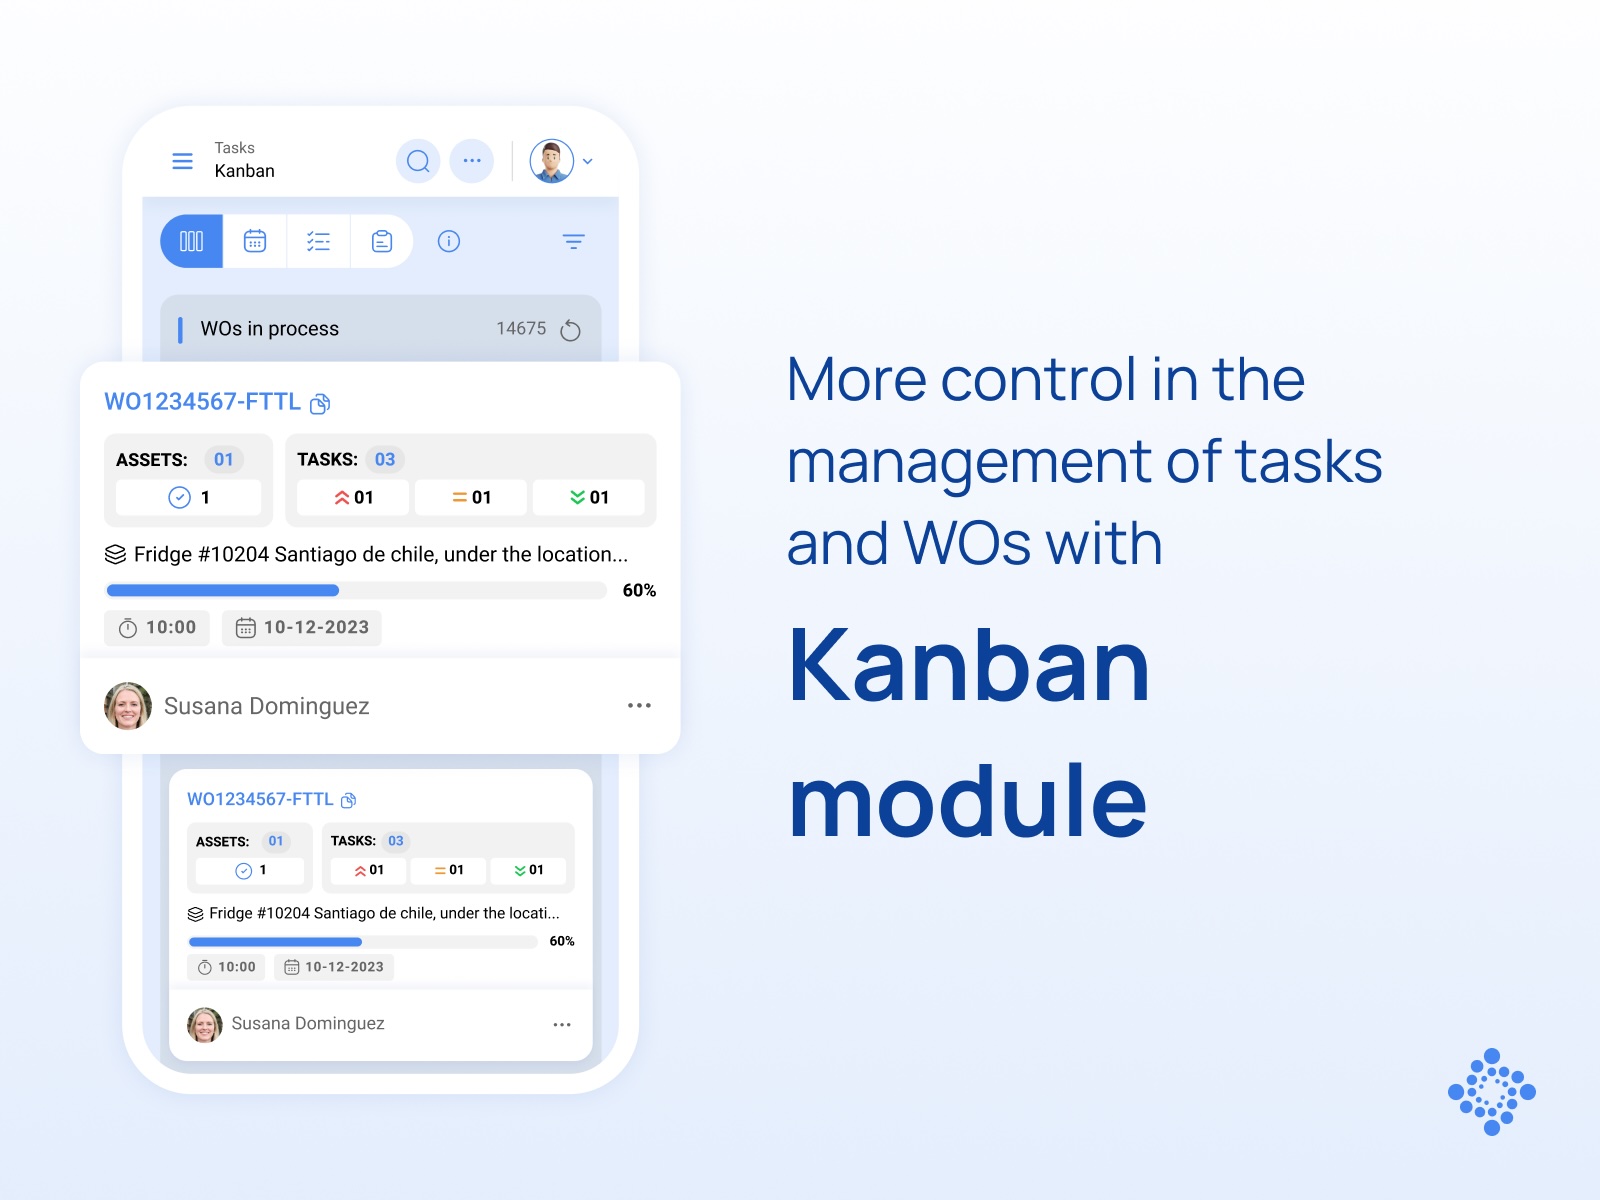 More control in the management of task and WOs with Kanban module.